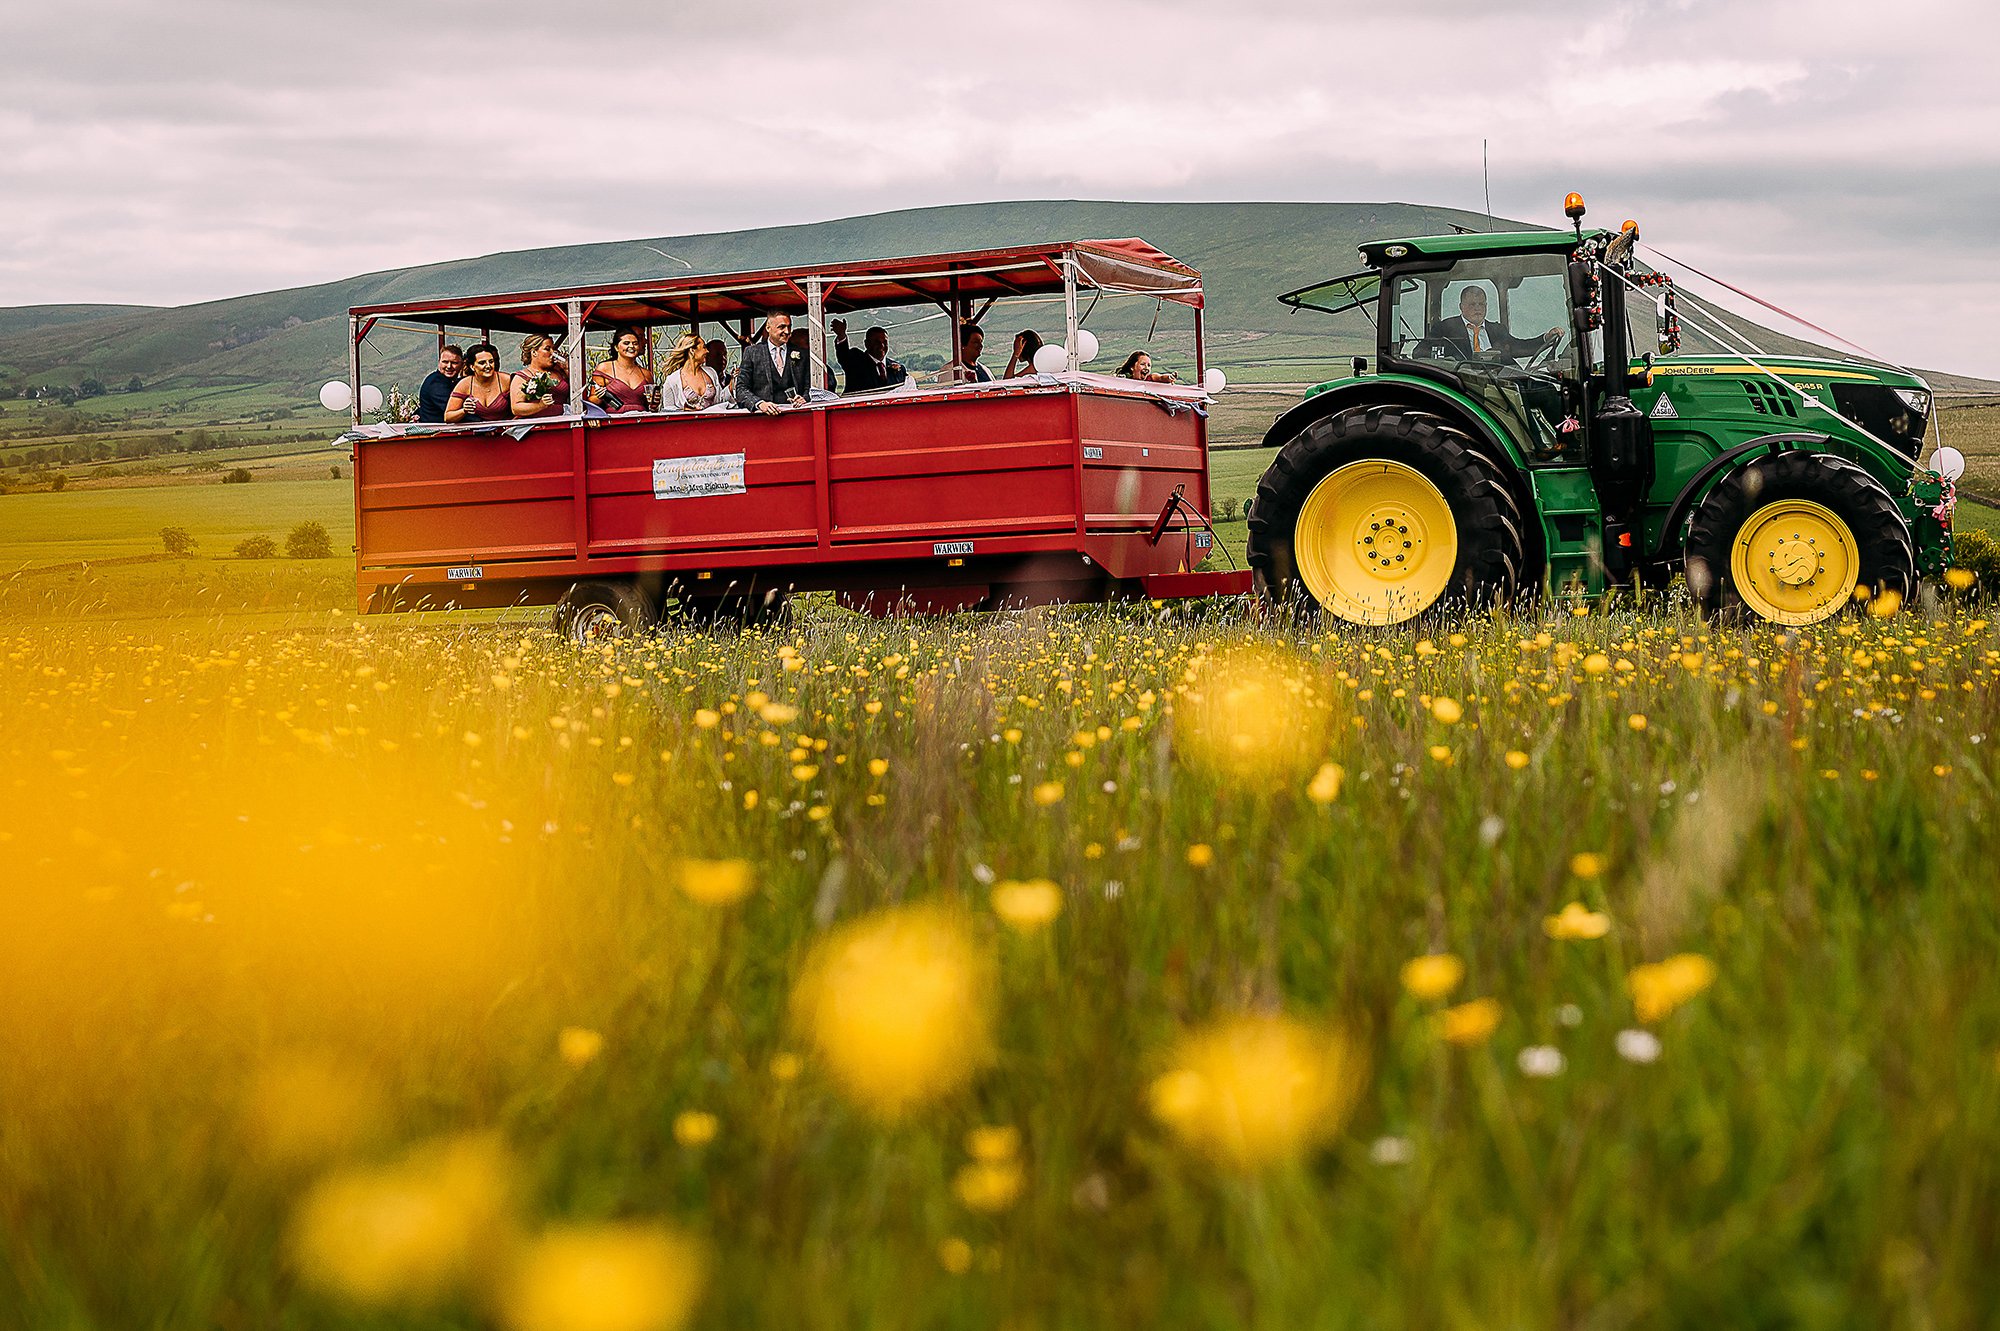  Tractor with yellow wheels mirrored by daffodils bringing guests to reception. 